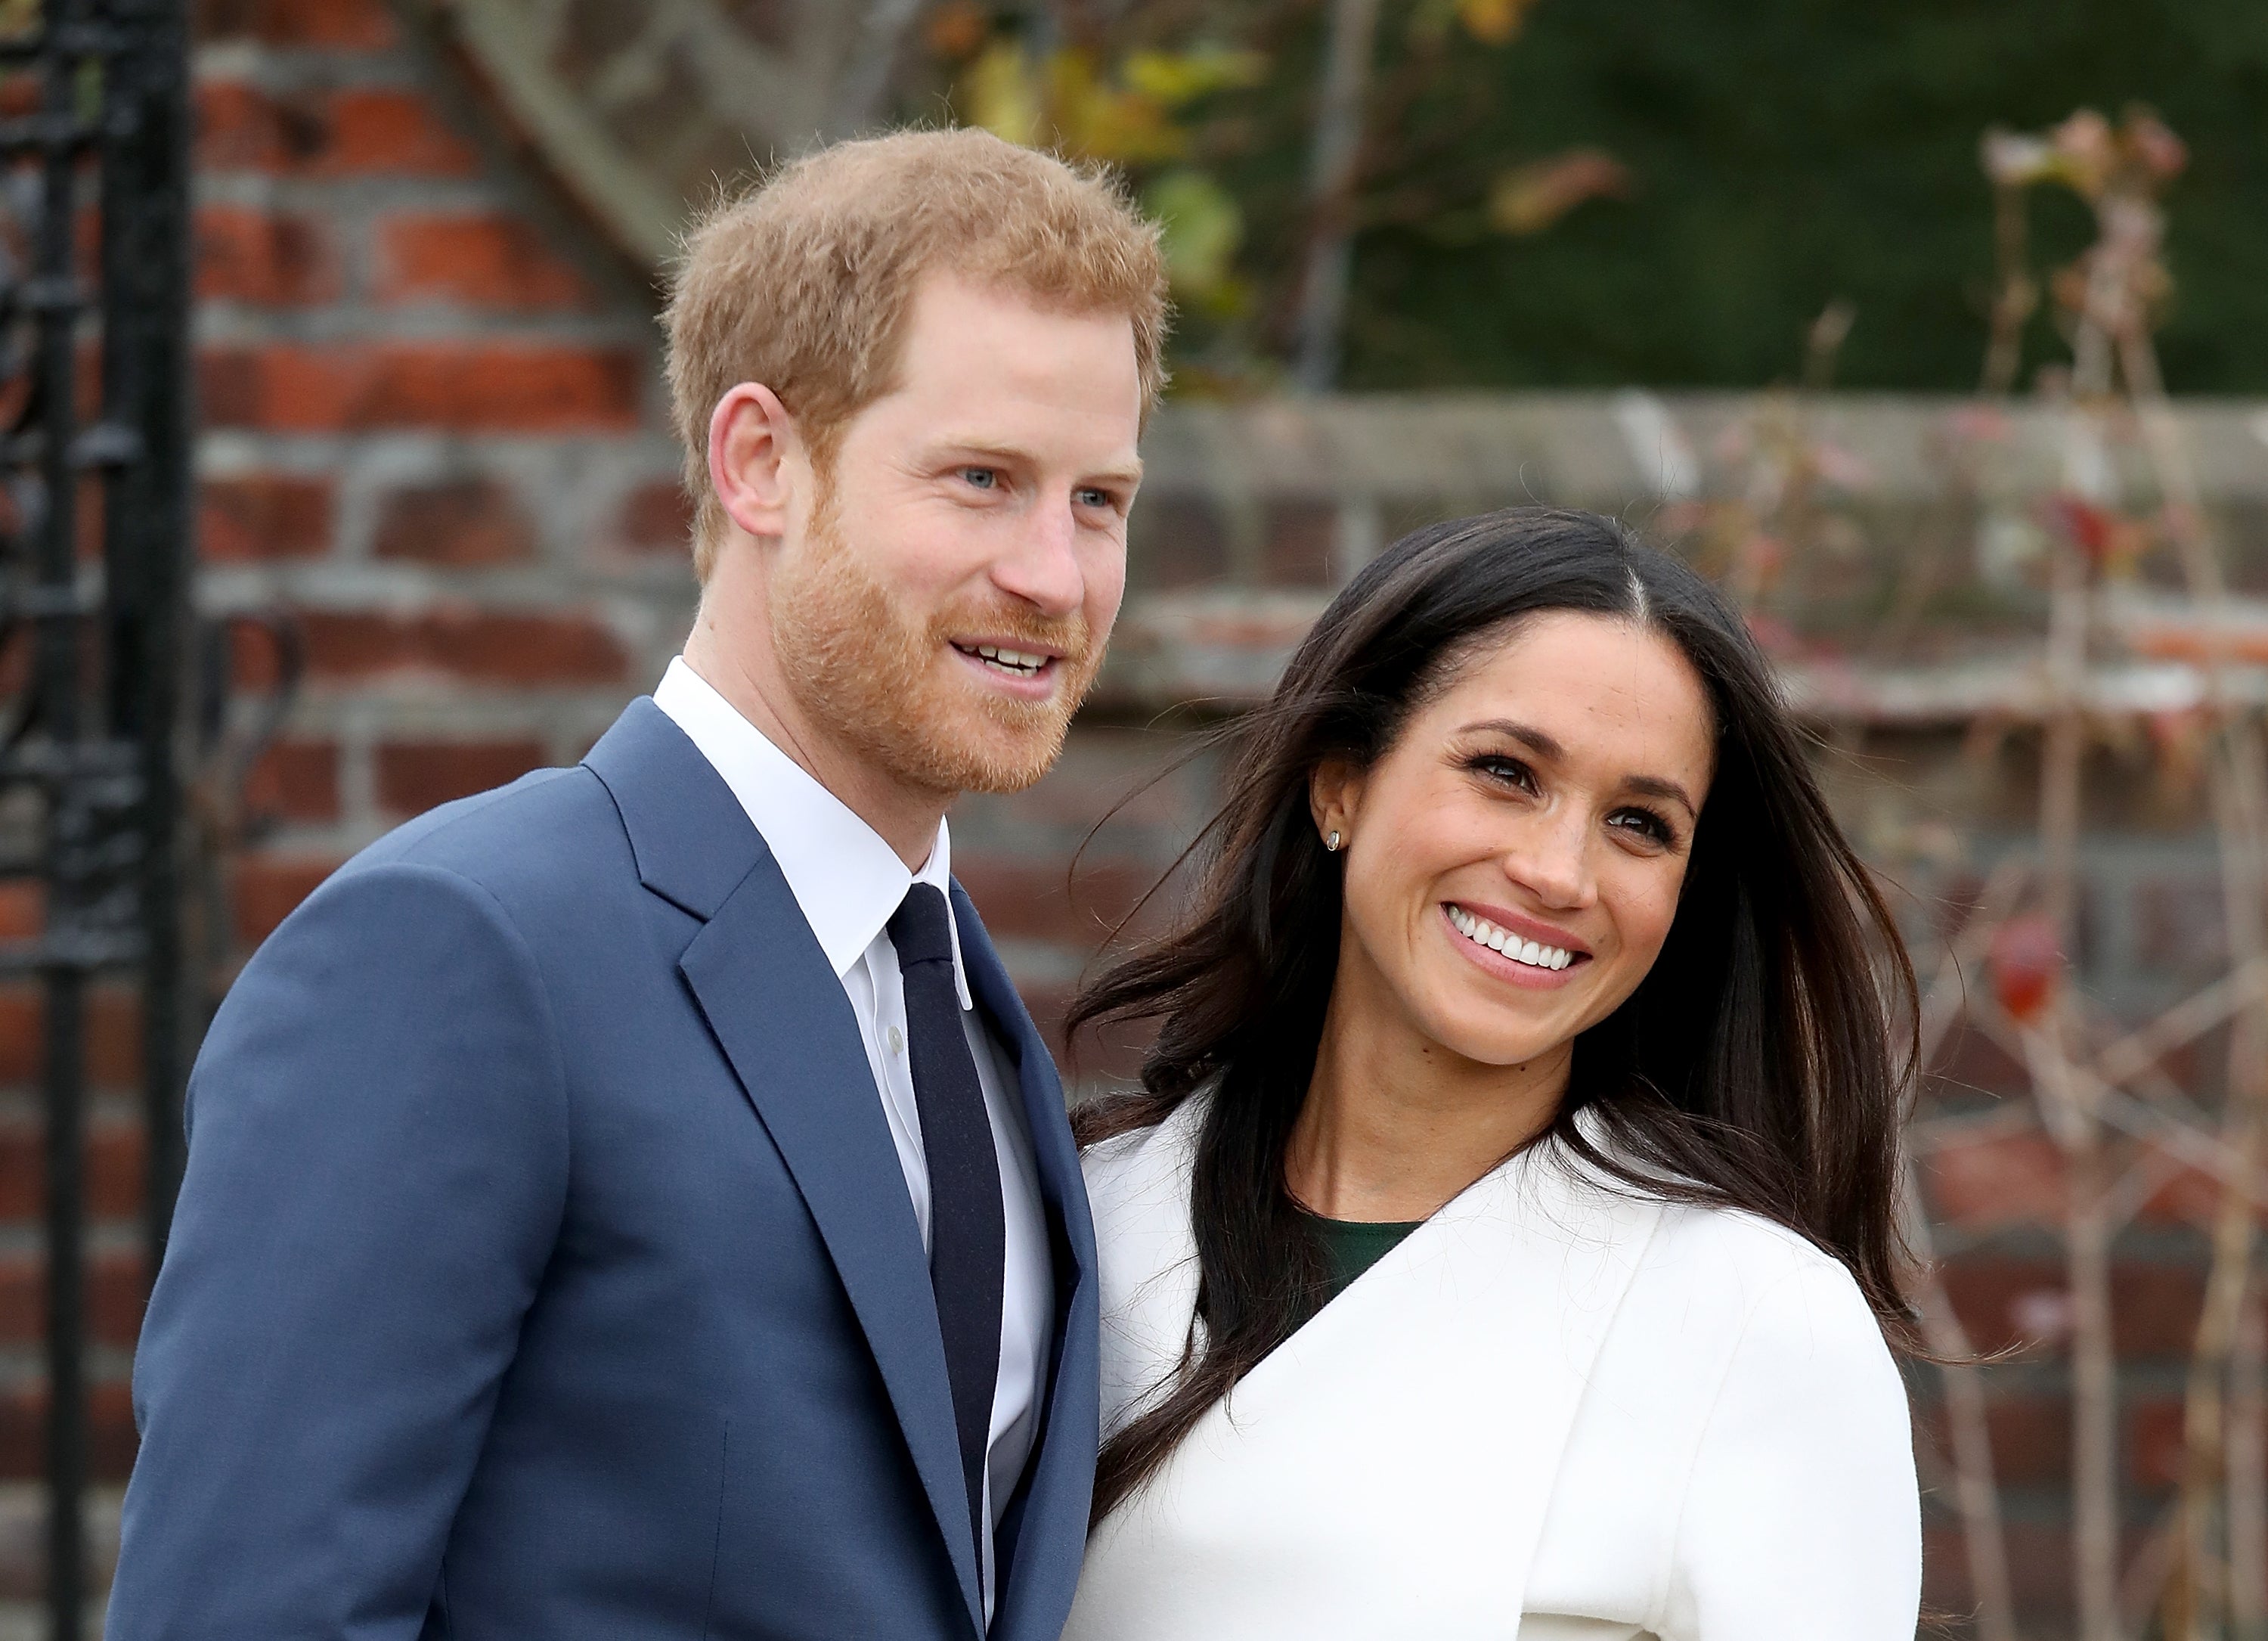 The discussion sees Harry and Meghan focus on prioritising mental health